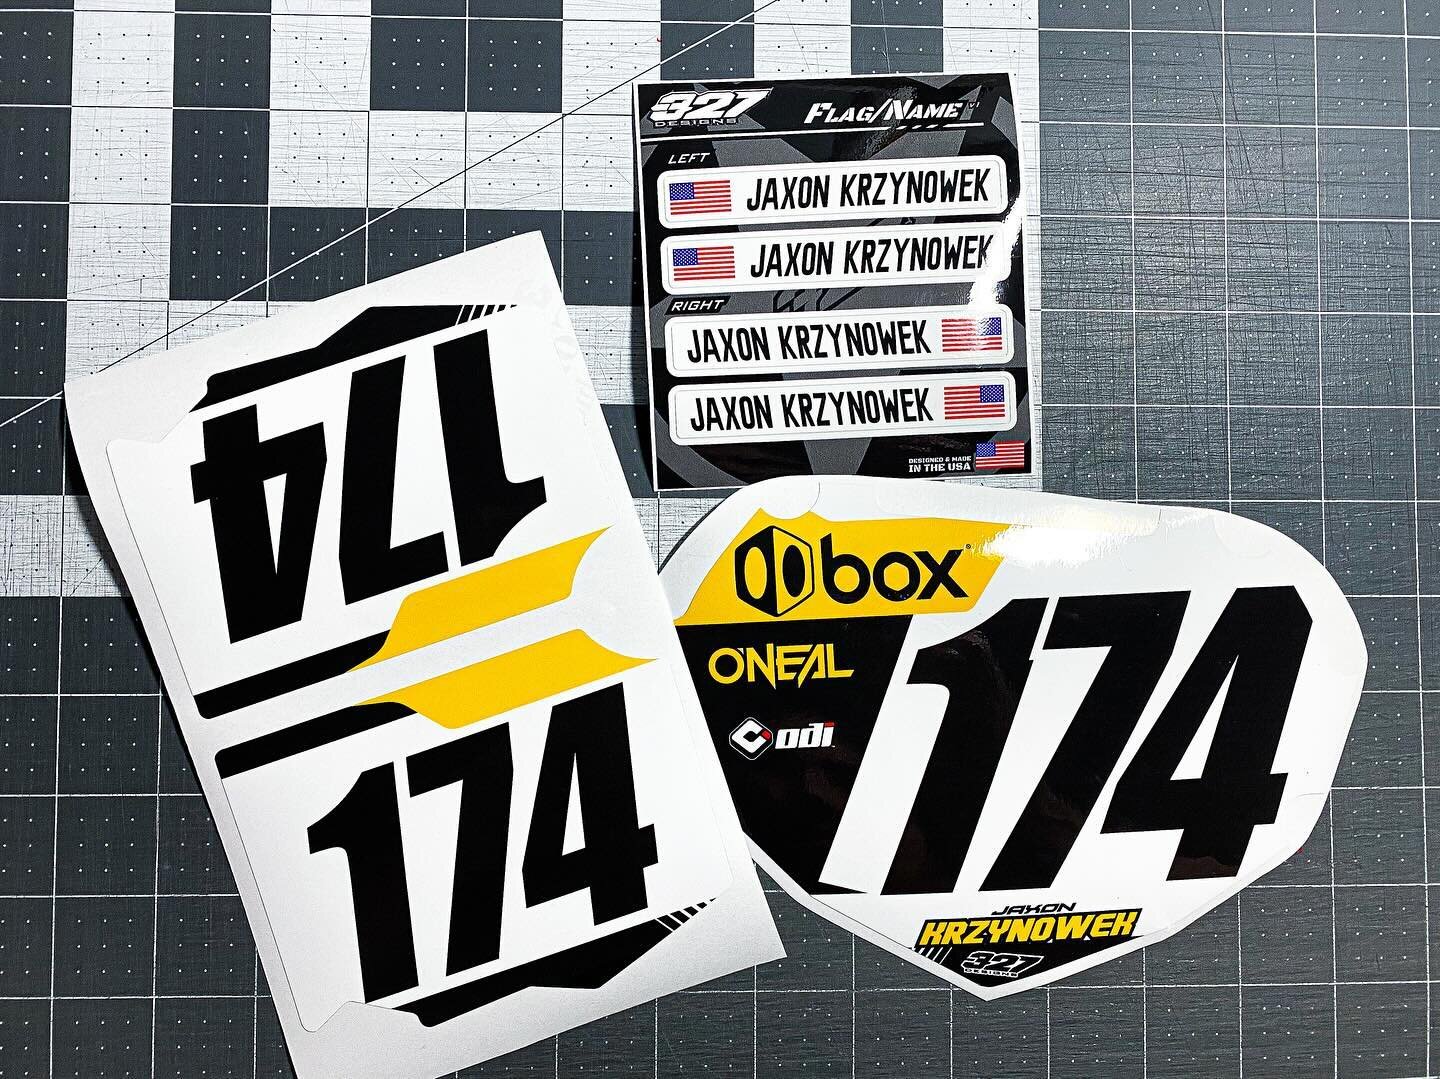 Some of the @boxbmx #boxlevelupprogram inserts that have gone out the shop doors 📦 #327army

Available on our website 🖥️ 327Designs.com

&mdash;

#bmx #bmxracing #vinyl #usabmx #designs #racing #bikes #illustrator #graphicdesign #custom #graphicdes